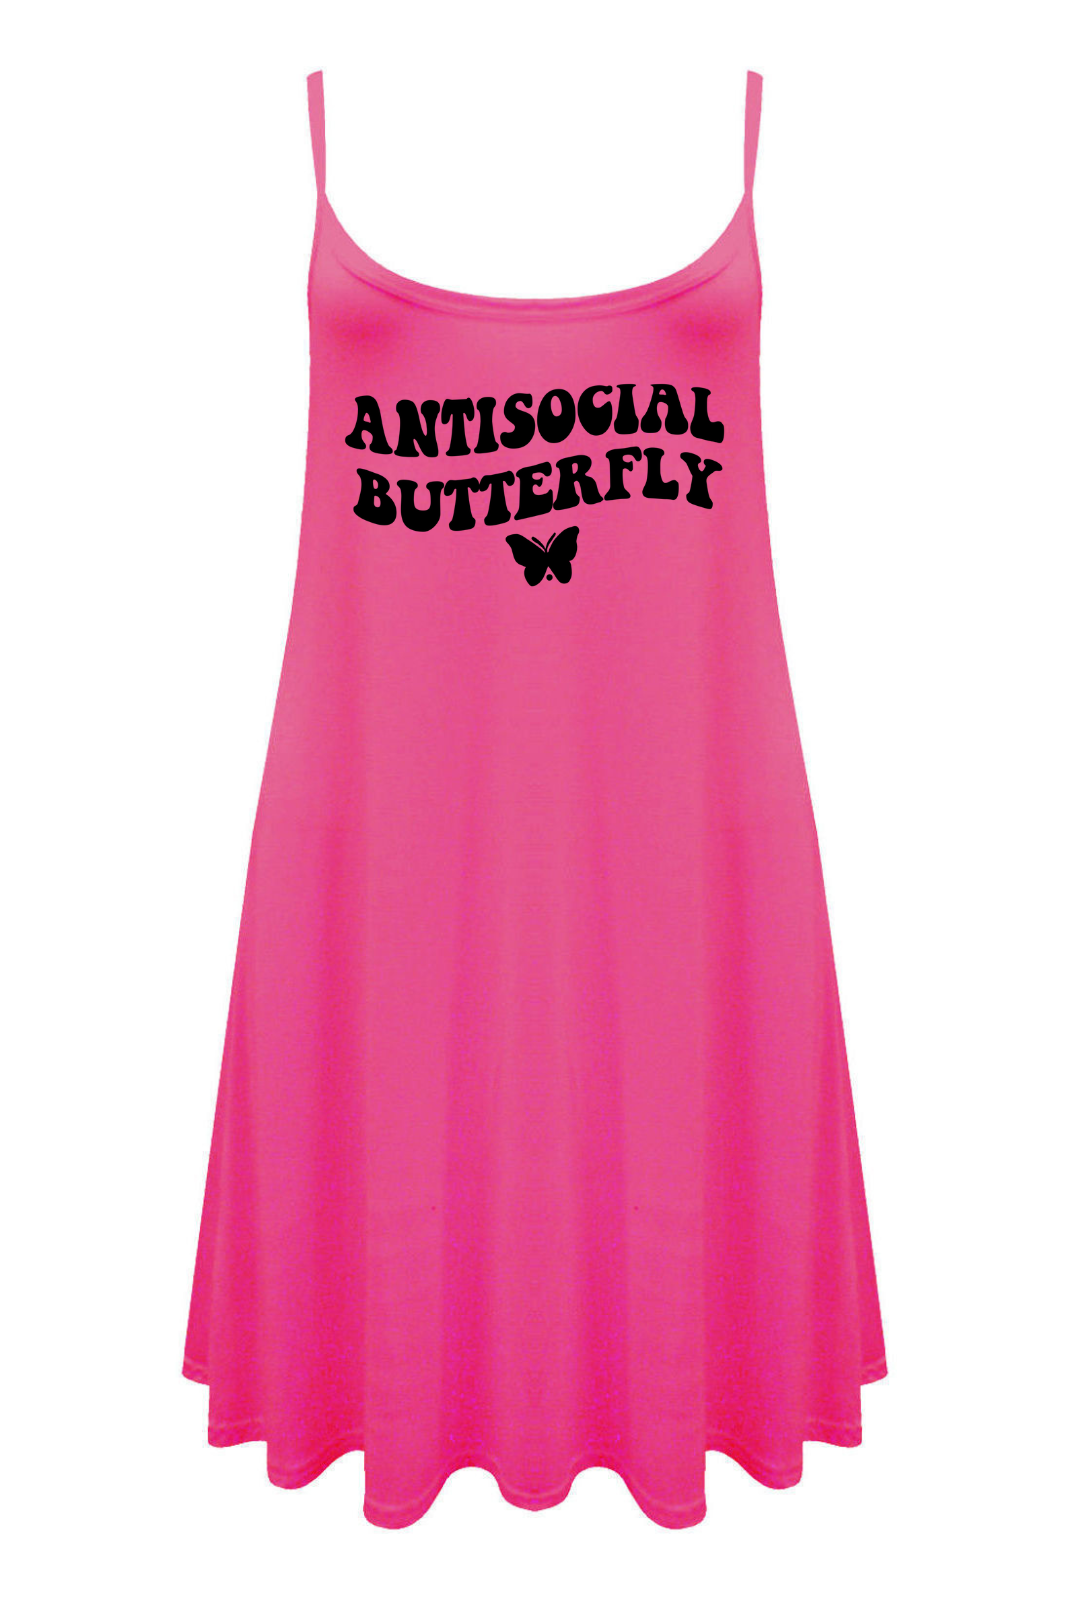 Hot Pink "Antisocial Butterfly" Printed Longline Camisole